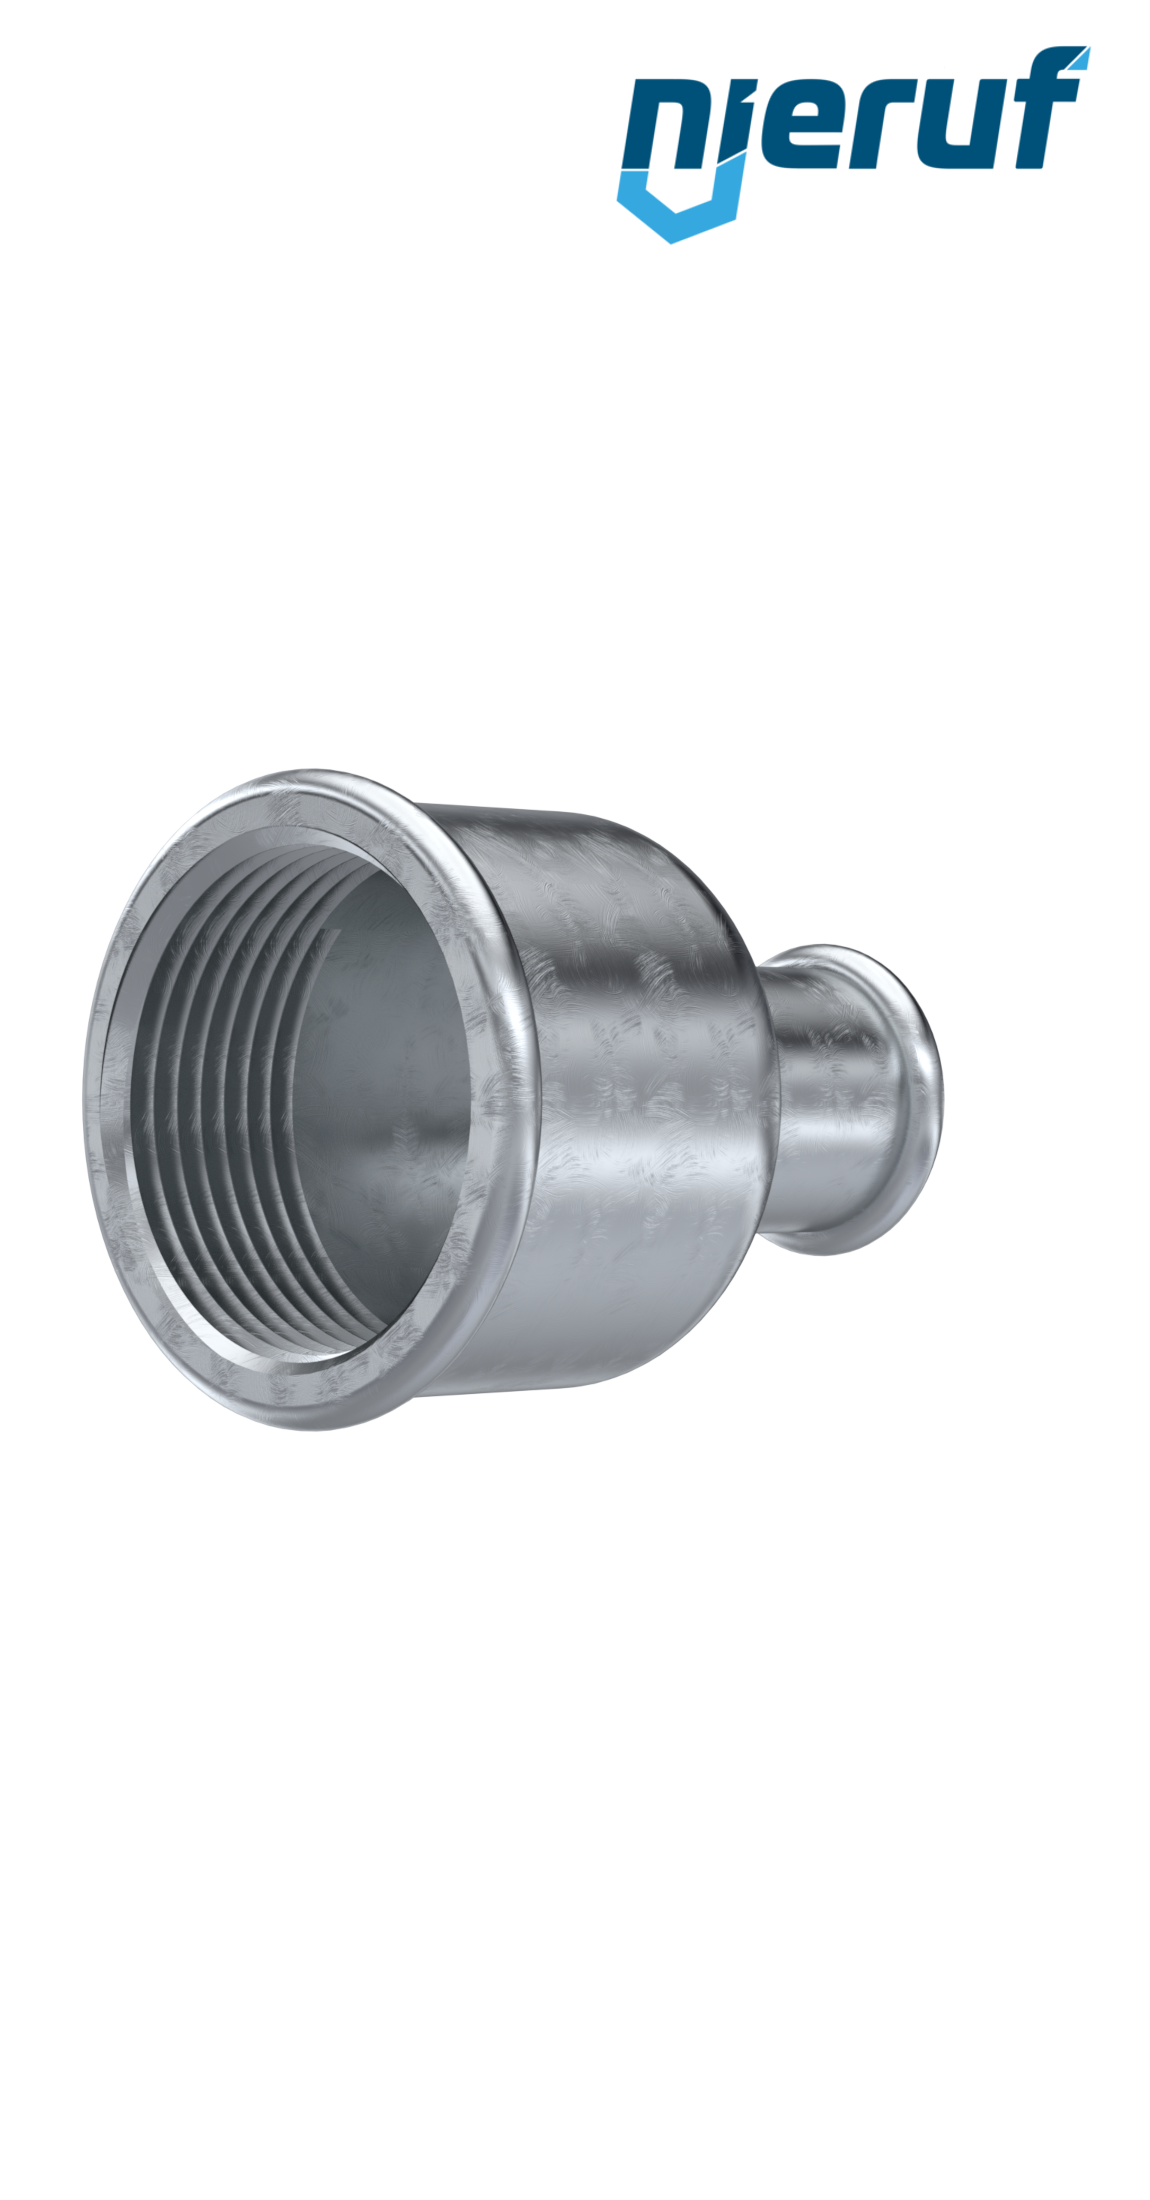 Malleable cast iron fitting reducing socket no. 240, 1 1/4" x 1/2" inch galvanized